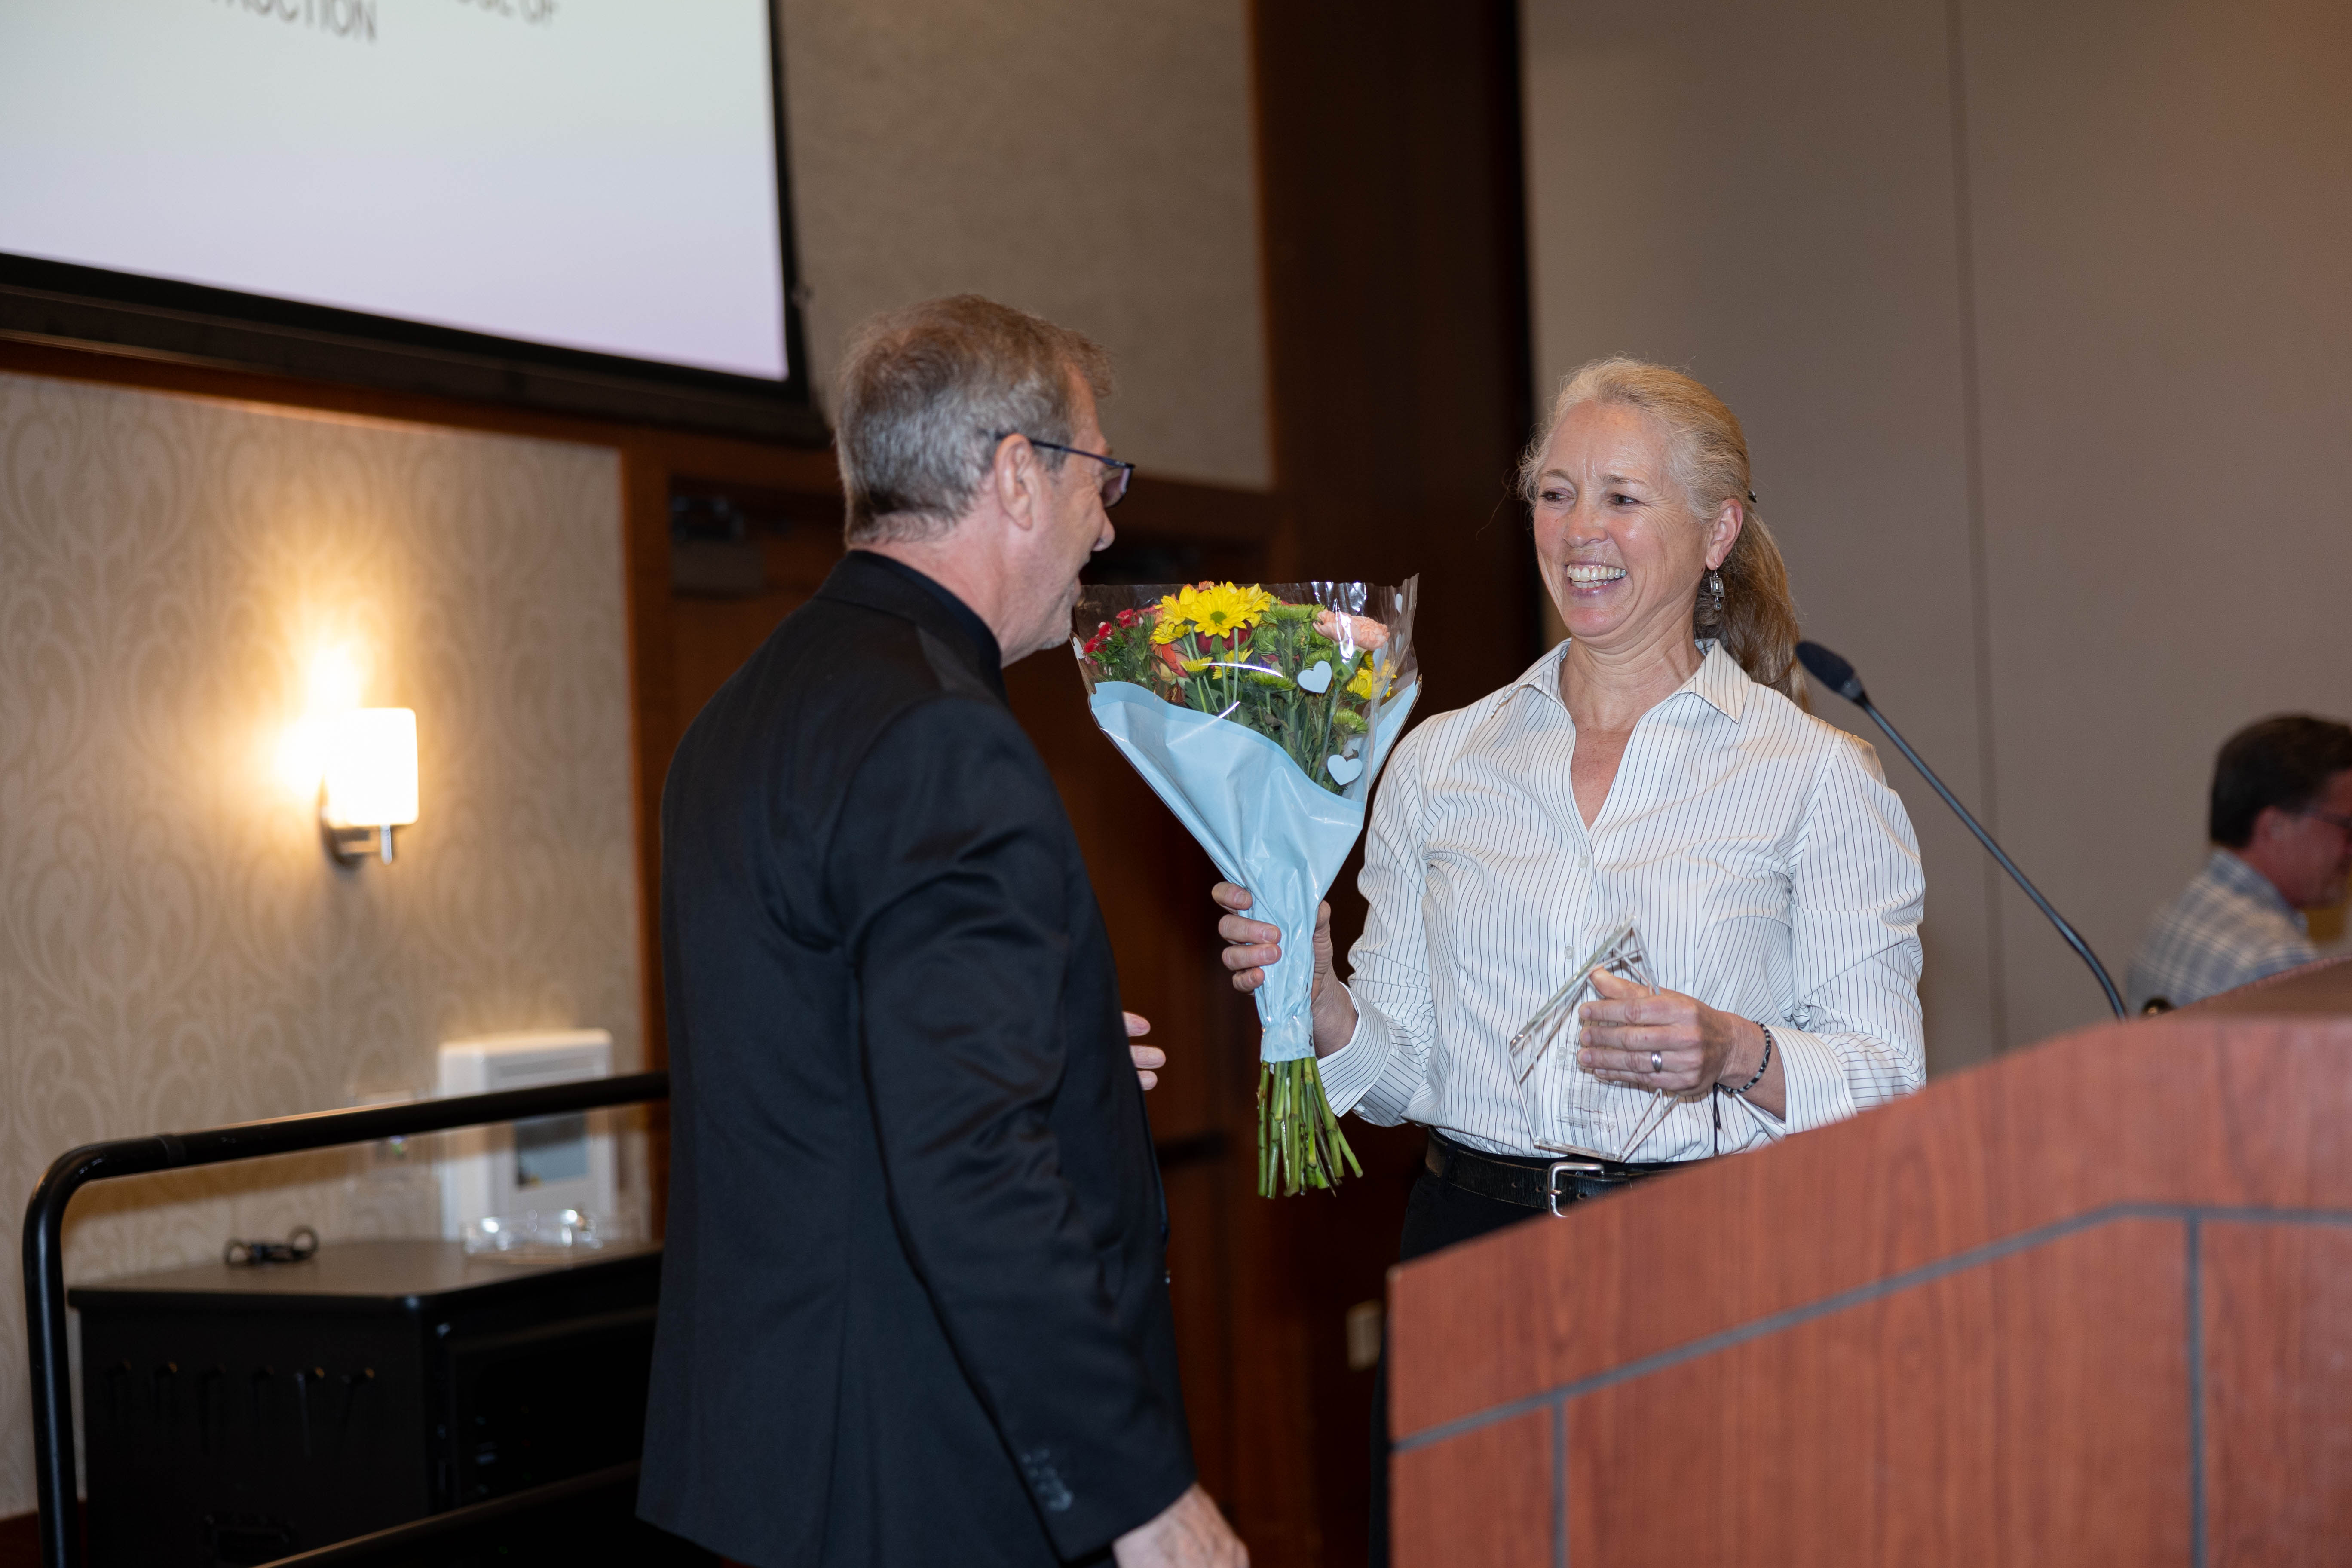 Brian Kleiner (at left) gives Kirsten Leckszas '88 flowers and her award. Photo by Will Drew for Virginia Tech.